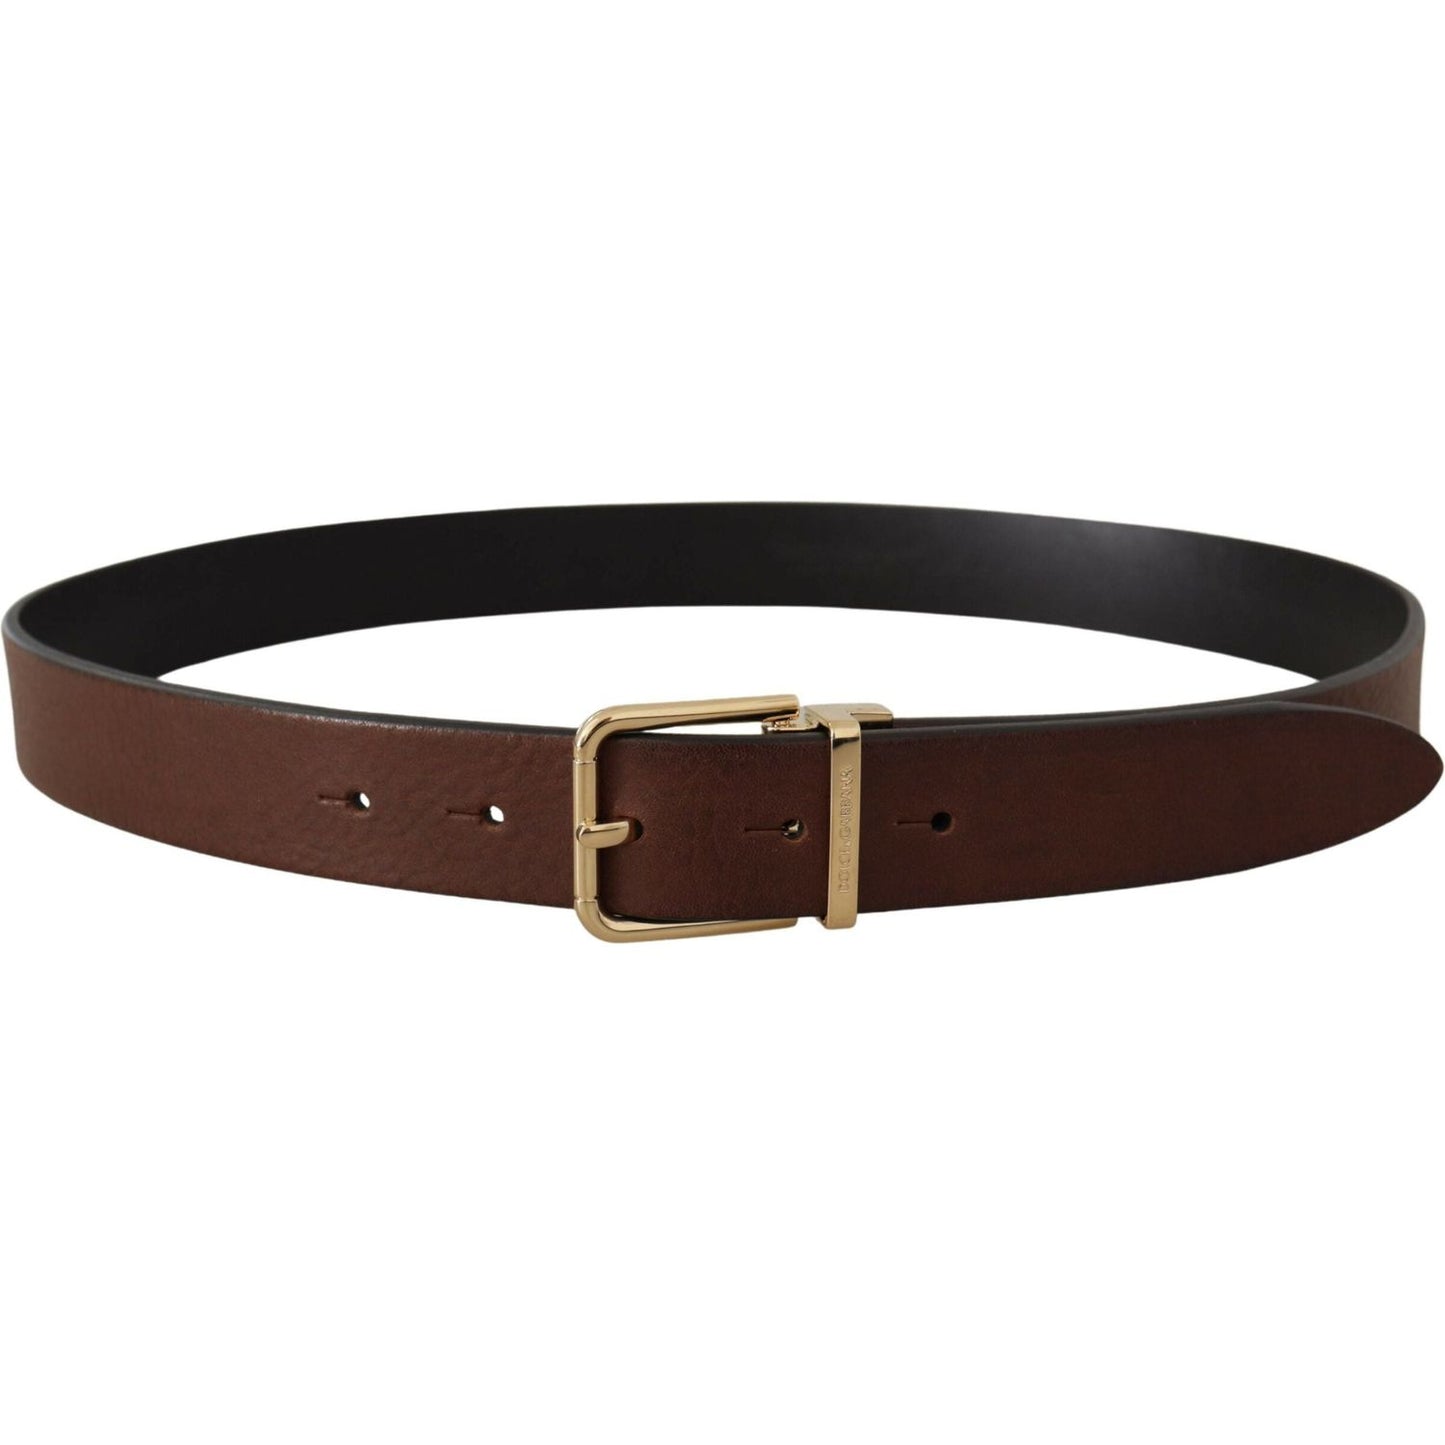 Dolce & Gabbana Elegant Brown Leather Belt with Metal Buckle brown-classic-leather-gold-tone-metal-buckle-belt